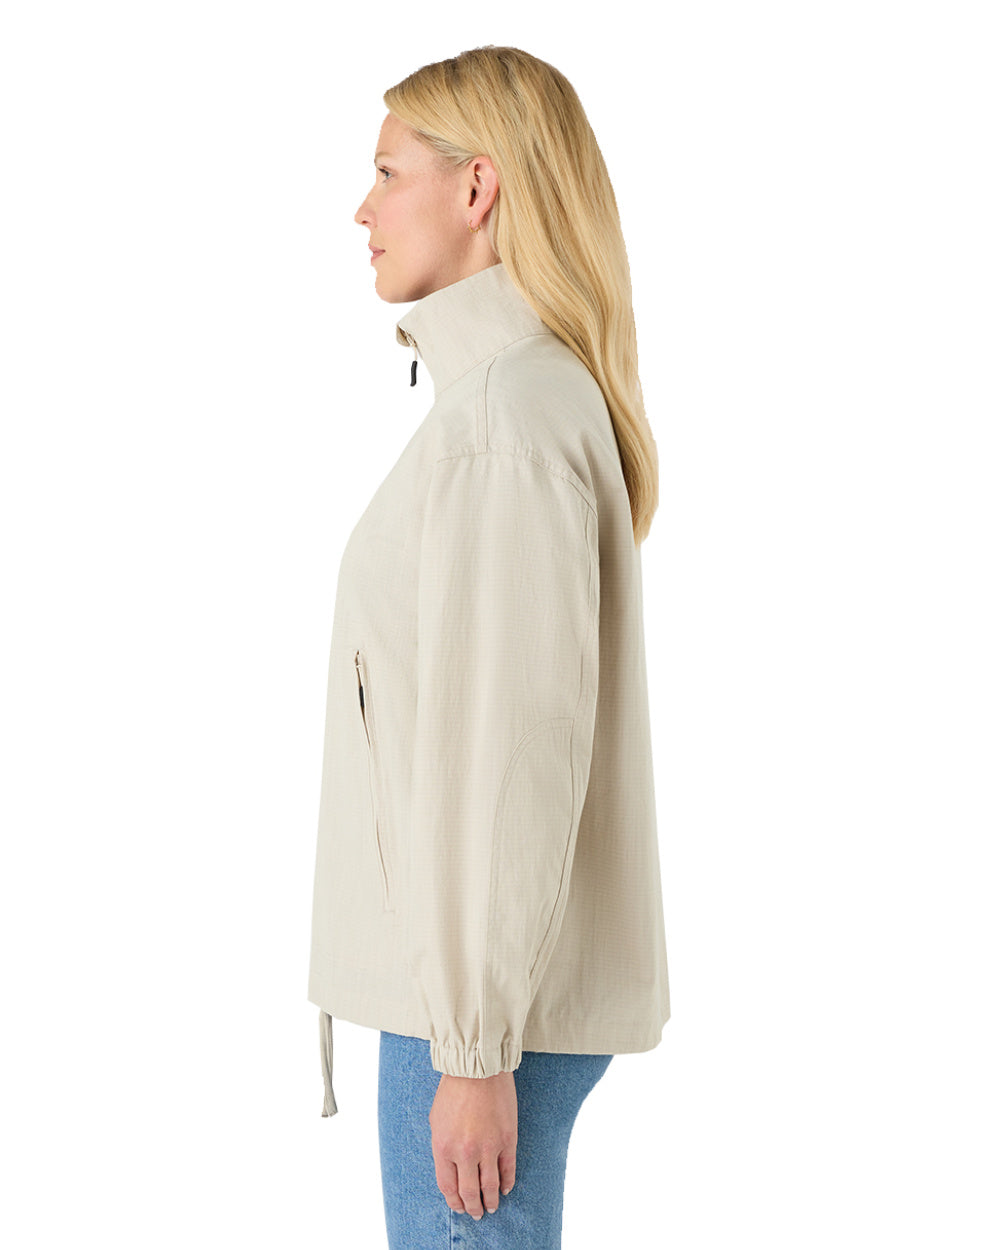 Pumice Coloured Musto Womens Falmouth Anorak Jacket On A White Background 